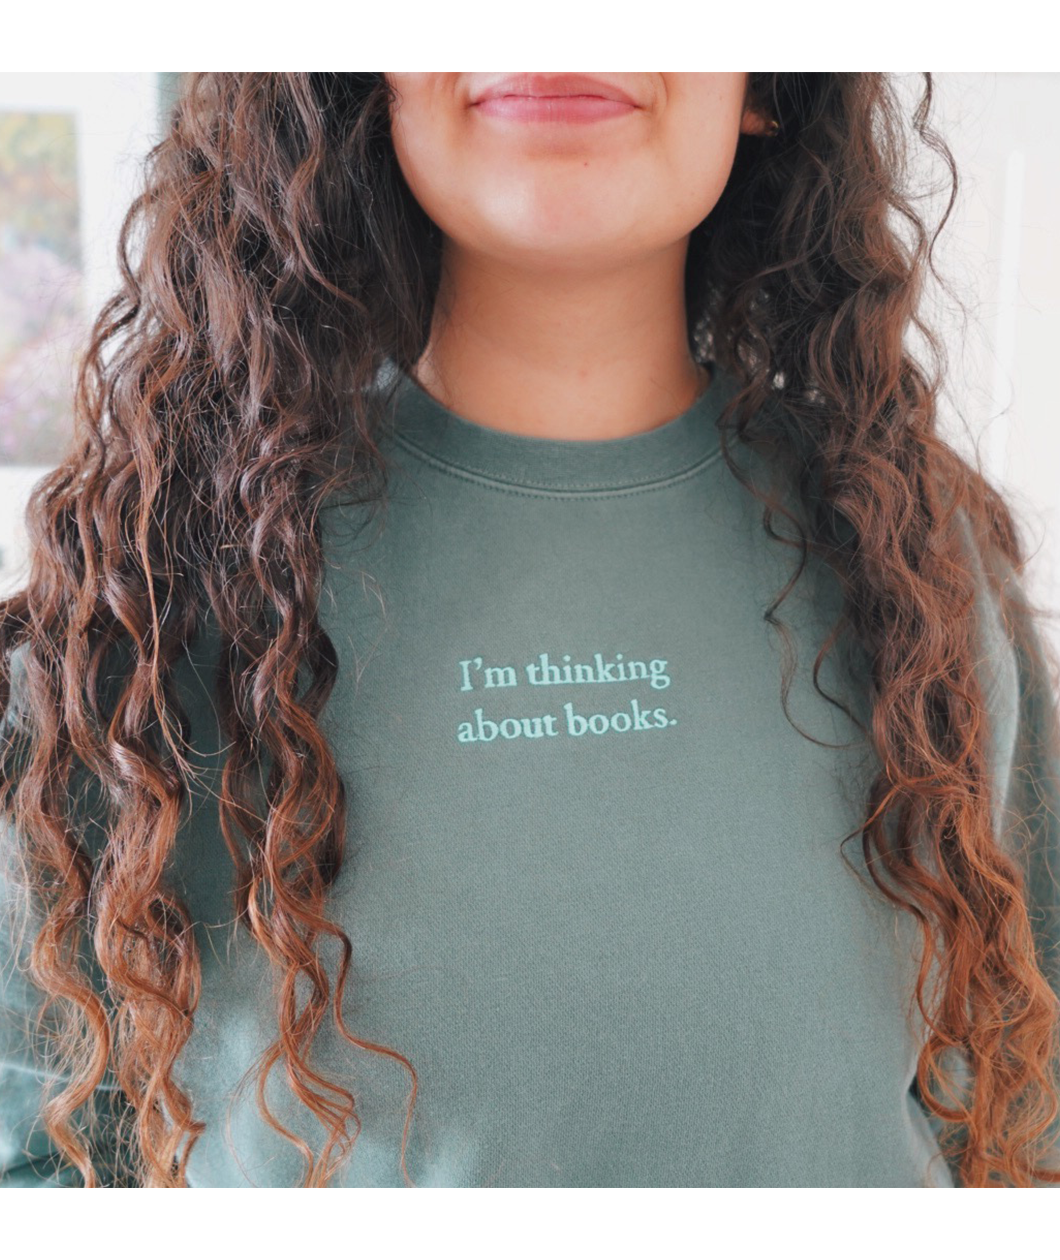 Close-up of the phrase "I'm thinking about books" written in mint on an alpine green sweatshirt worn by Ariel Bissett